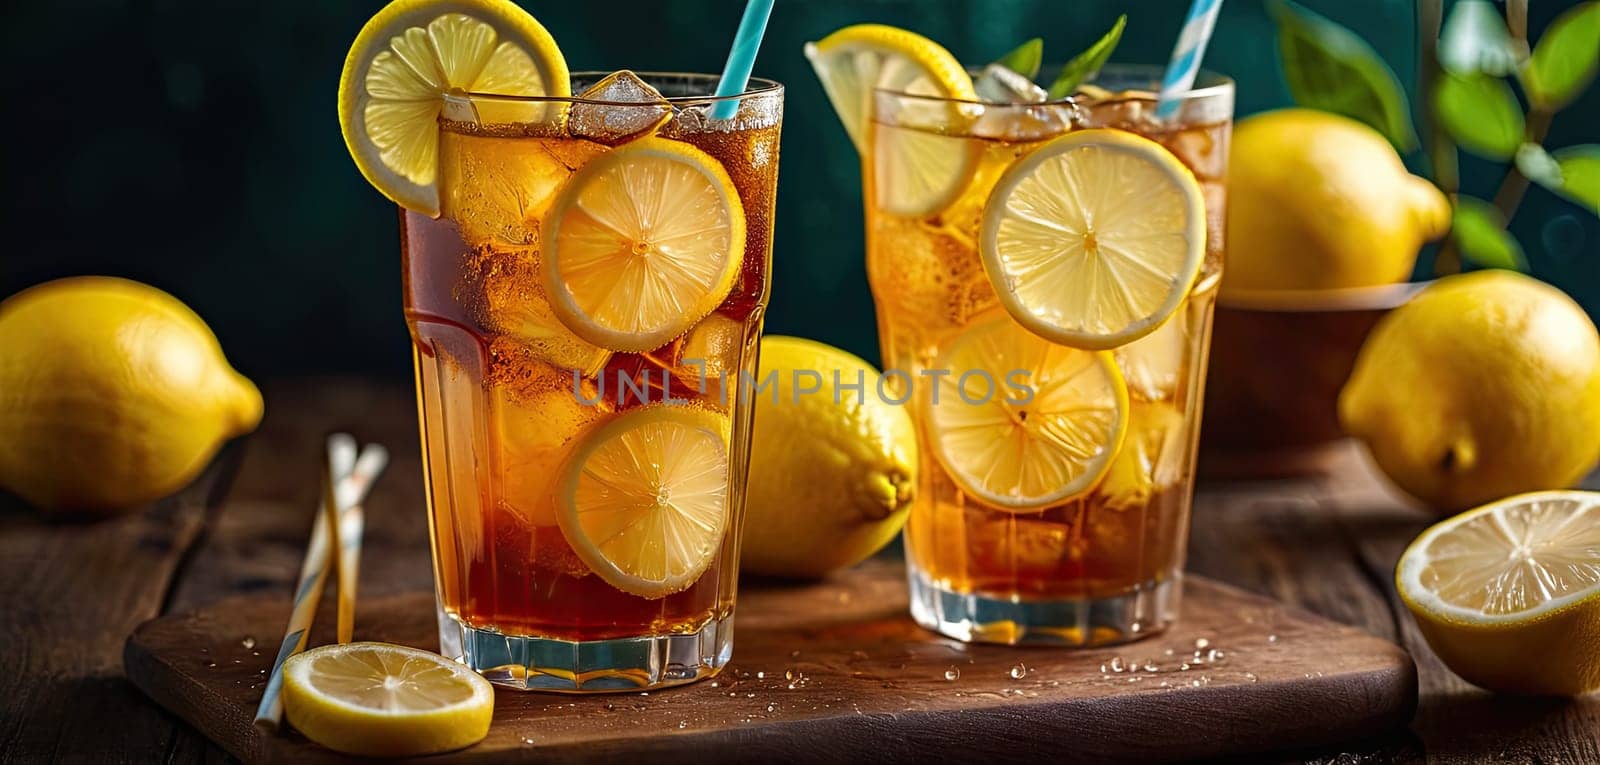 ice lemon tea, lemon, Served on wooden surface, Accompanied by lemon slices, set against warm ambient lighting evokes sense of refreshment by panophotograph